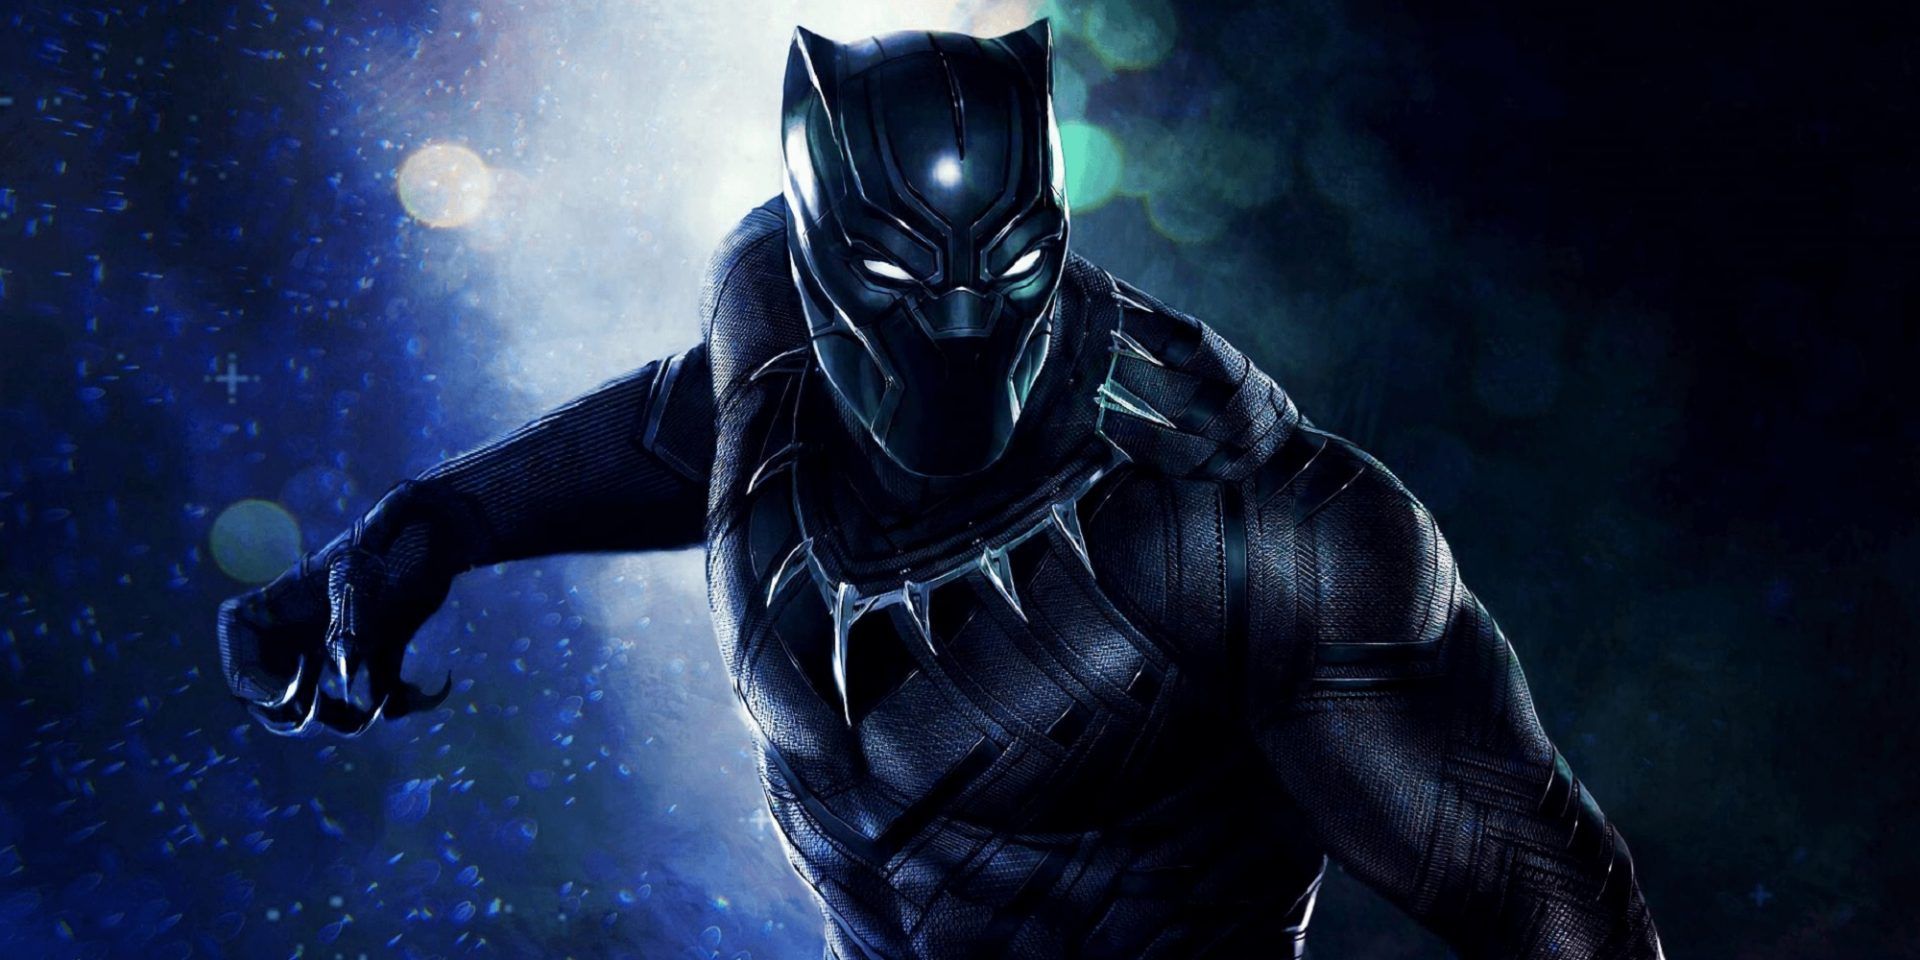 Black Panther In Suit Posing Against Dark Background